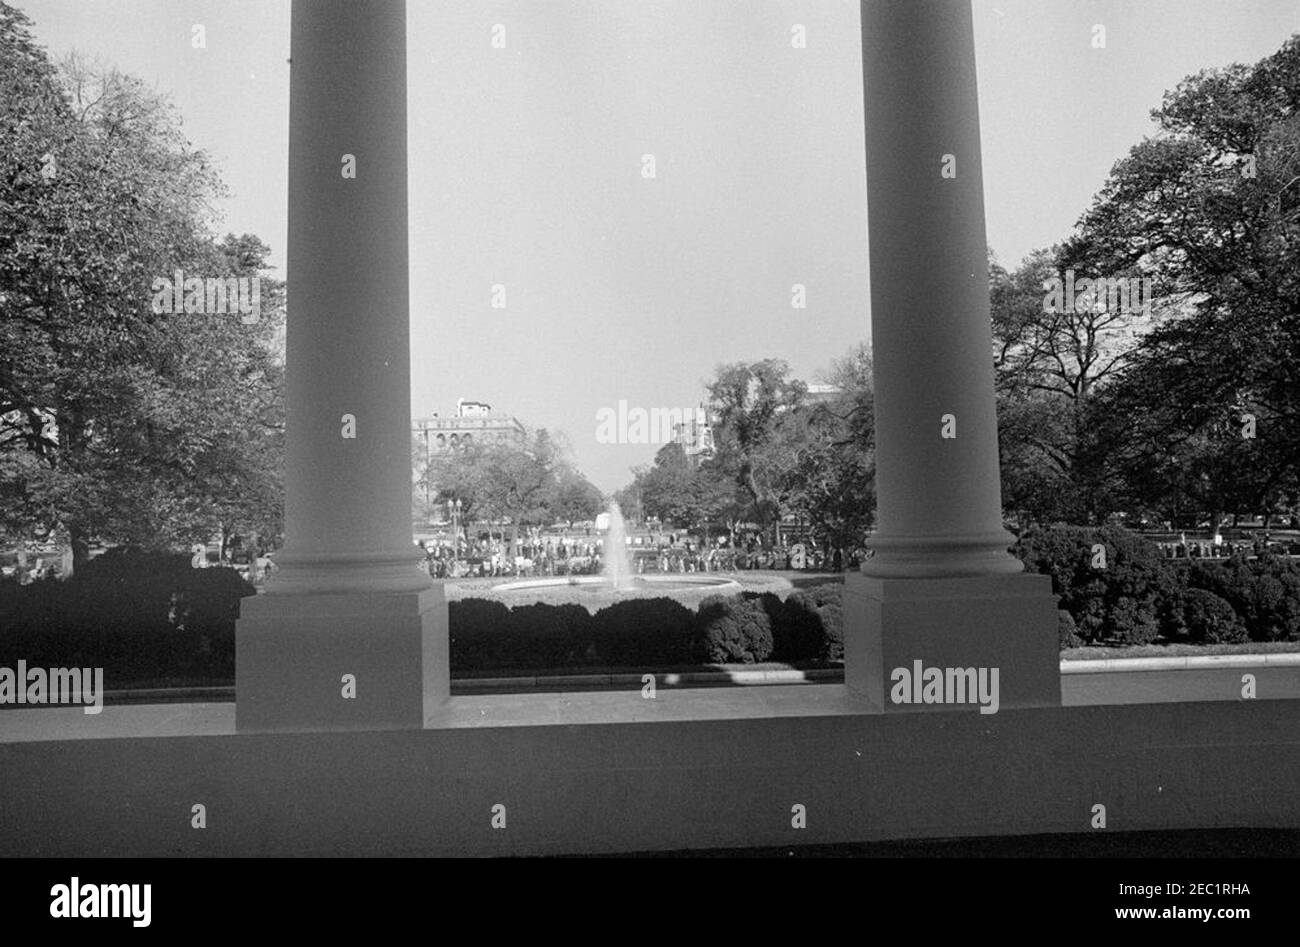 Demonstrators at the White House. View from the North Portico of the White House, as demonstrators picket along Pennsylvania Avenue in response to the crisis in Cuba. Washington, D.C. Stock Photo